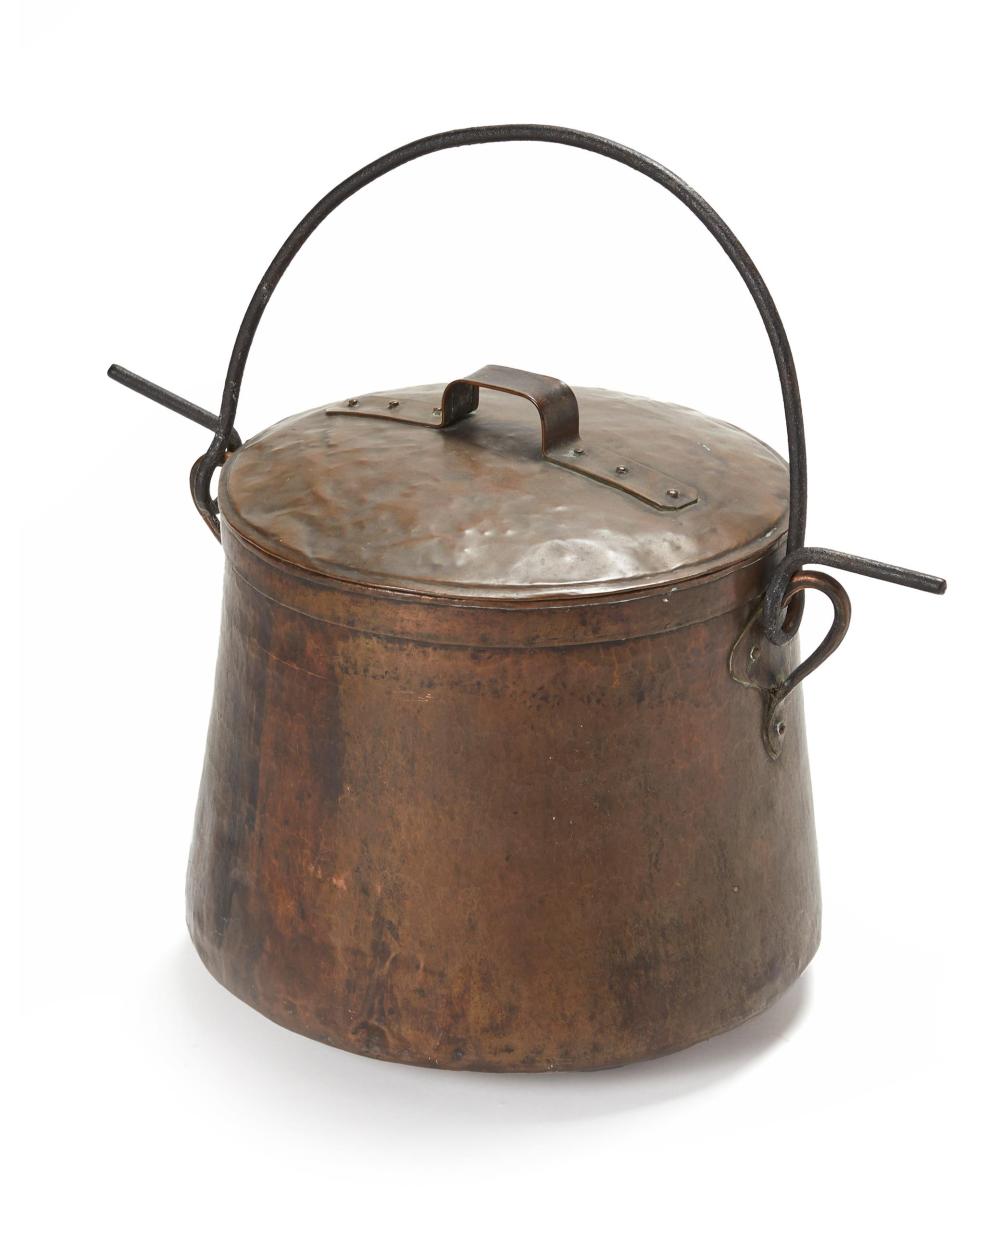 A LARGE HAMMERED COPPER AND IRON COOKING